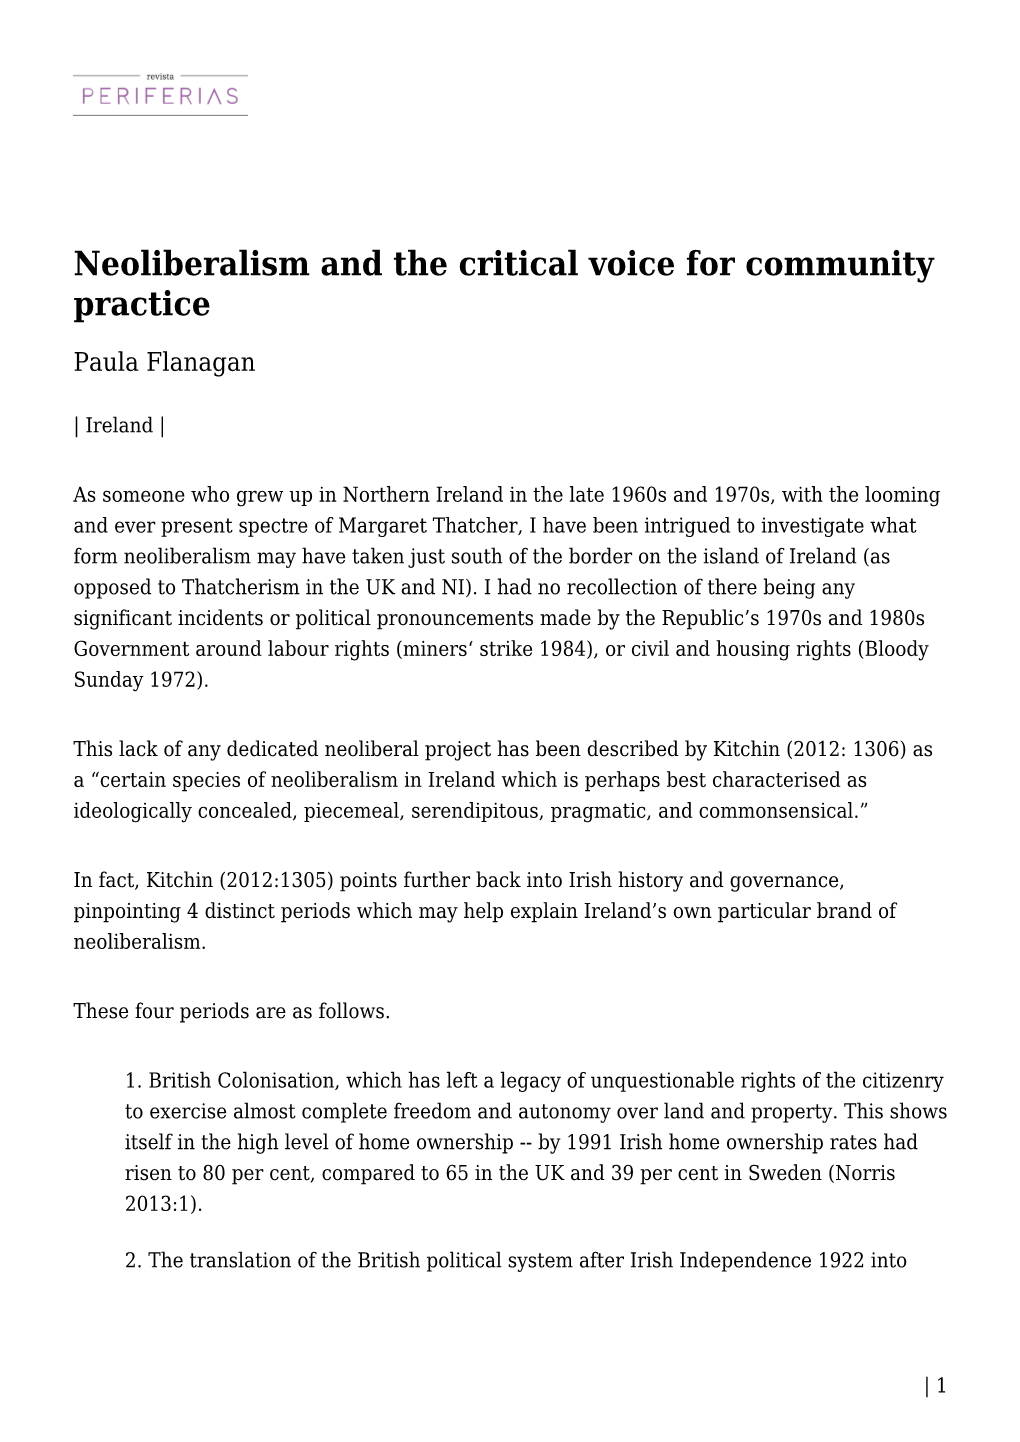 Neoliberalism and the Critical Voice for Community Practice